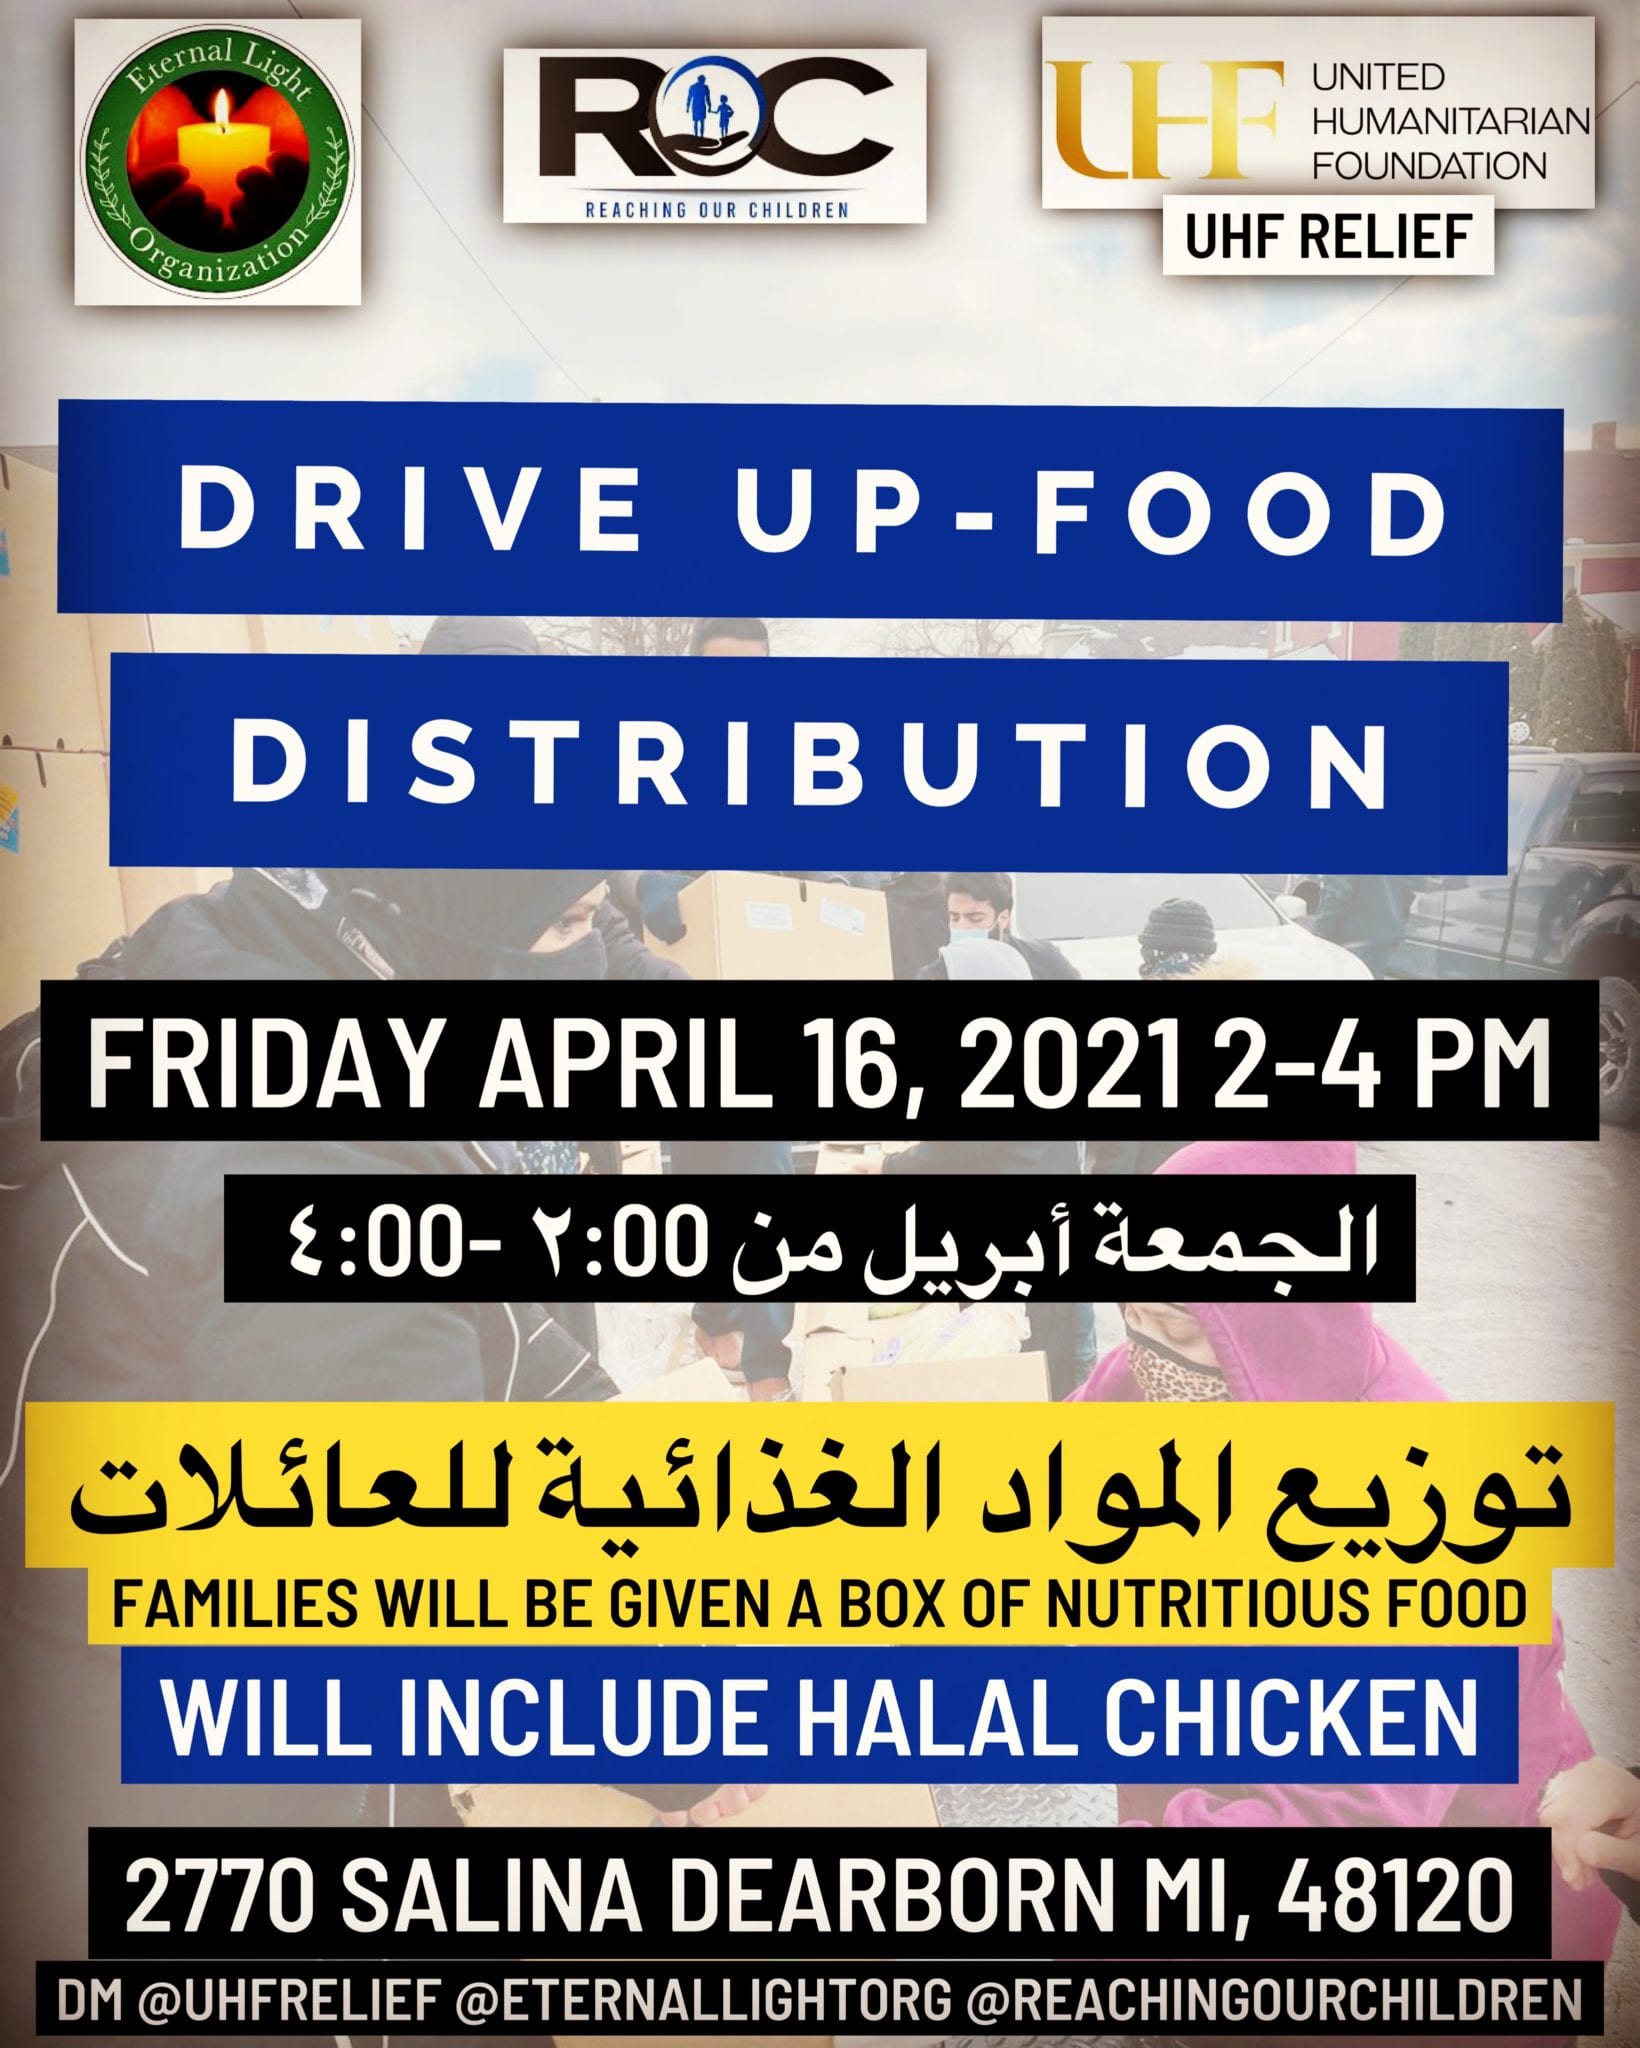 Drive up food distribution TODAY